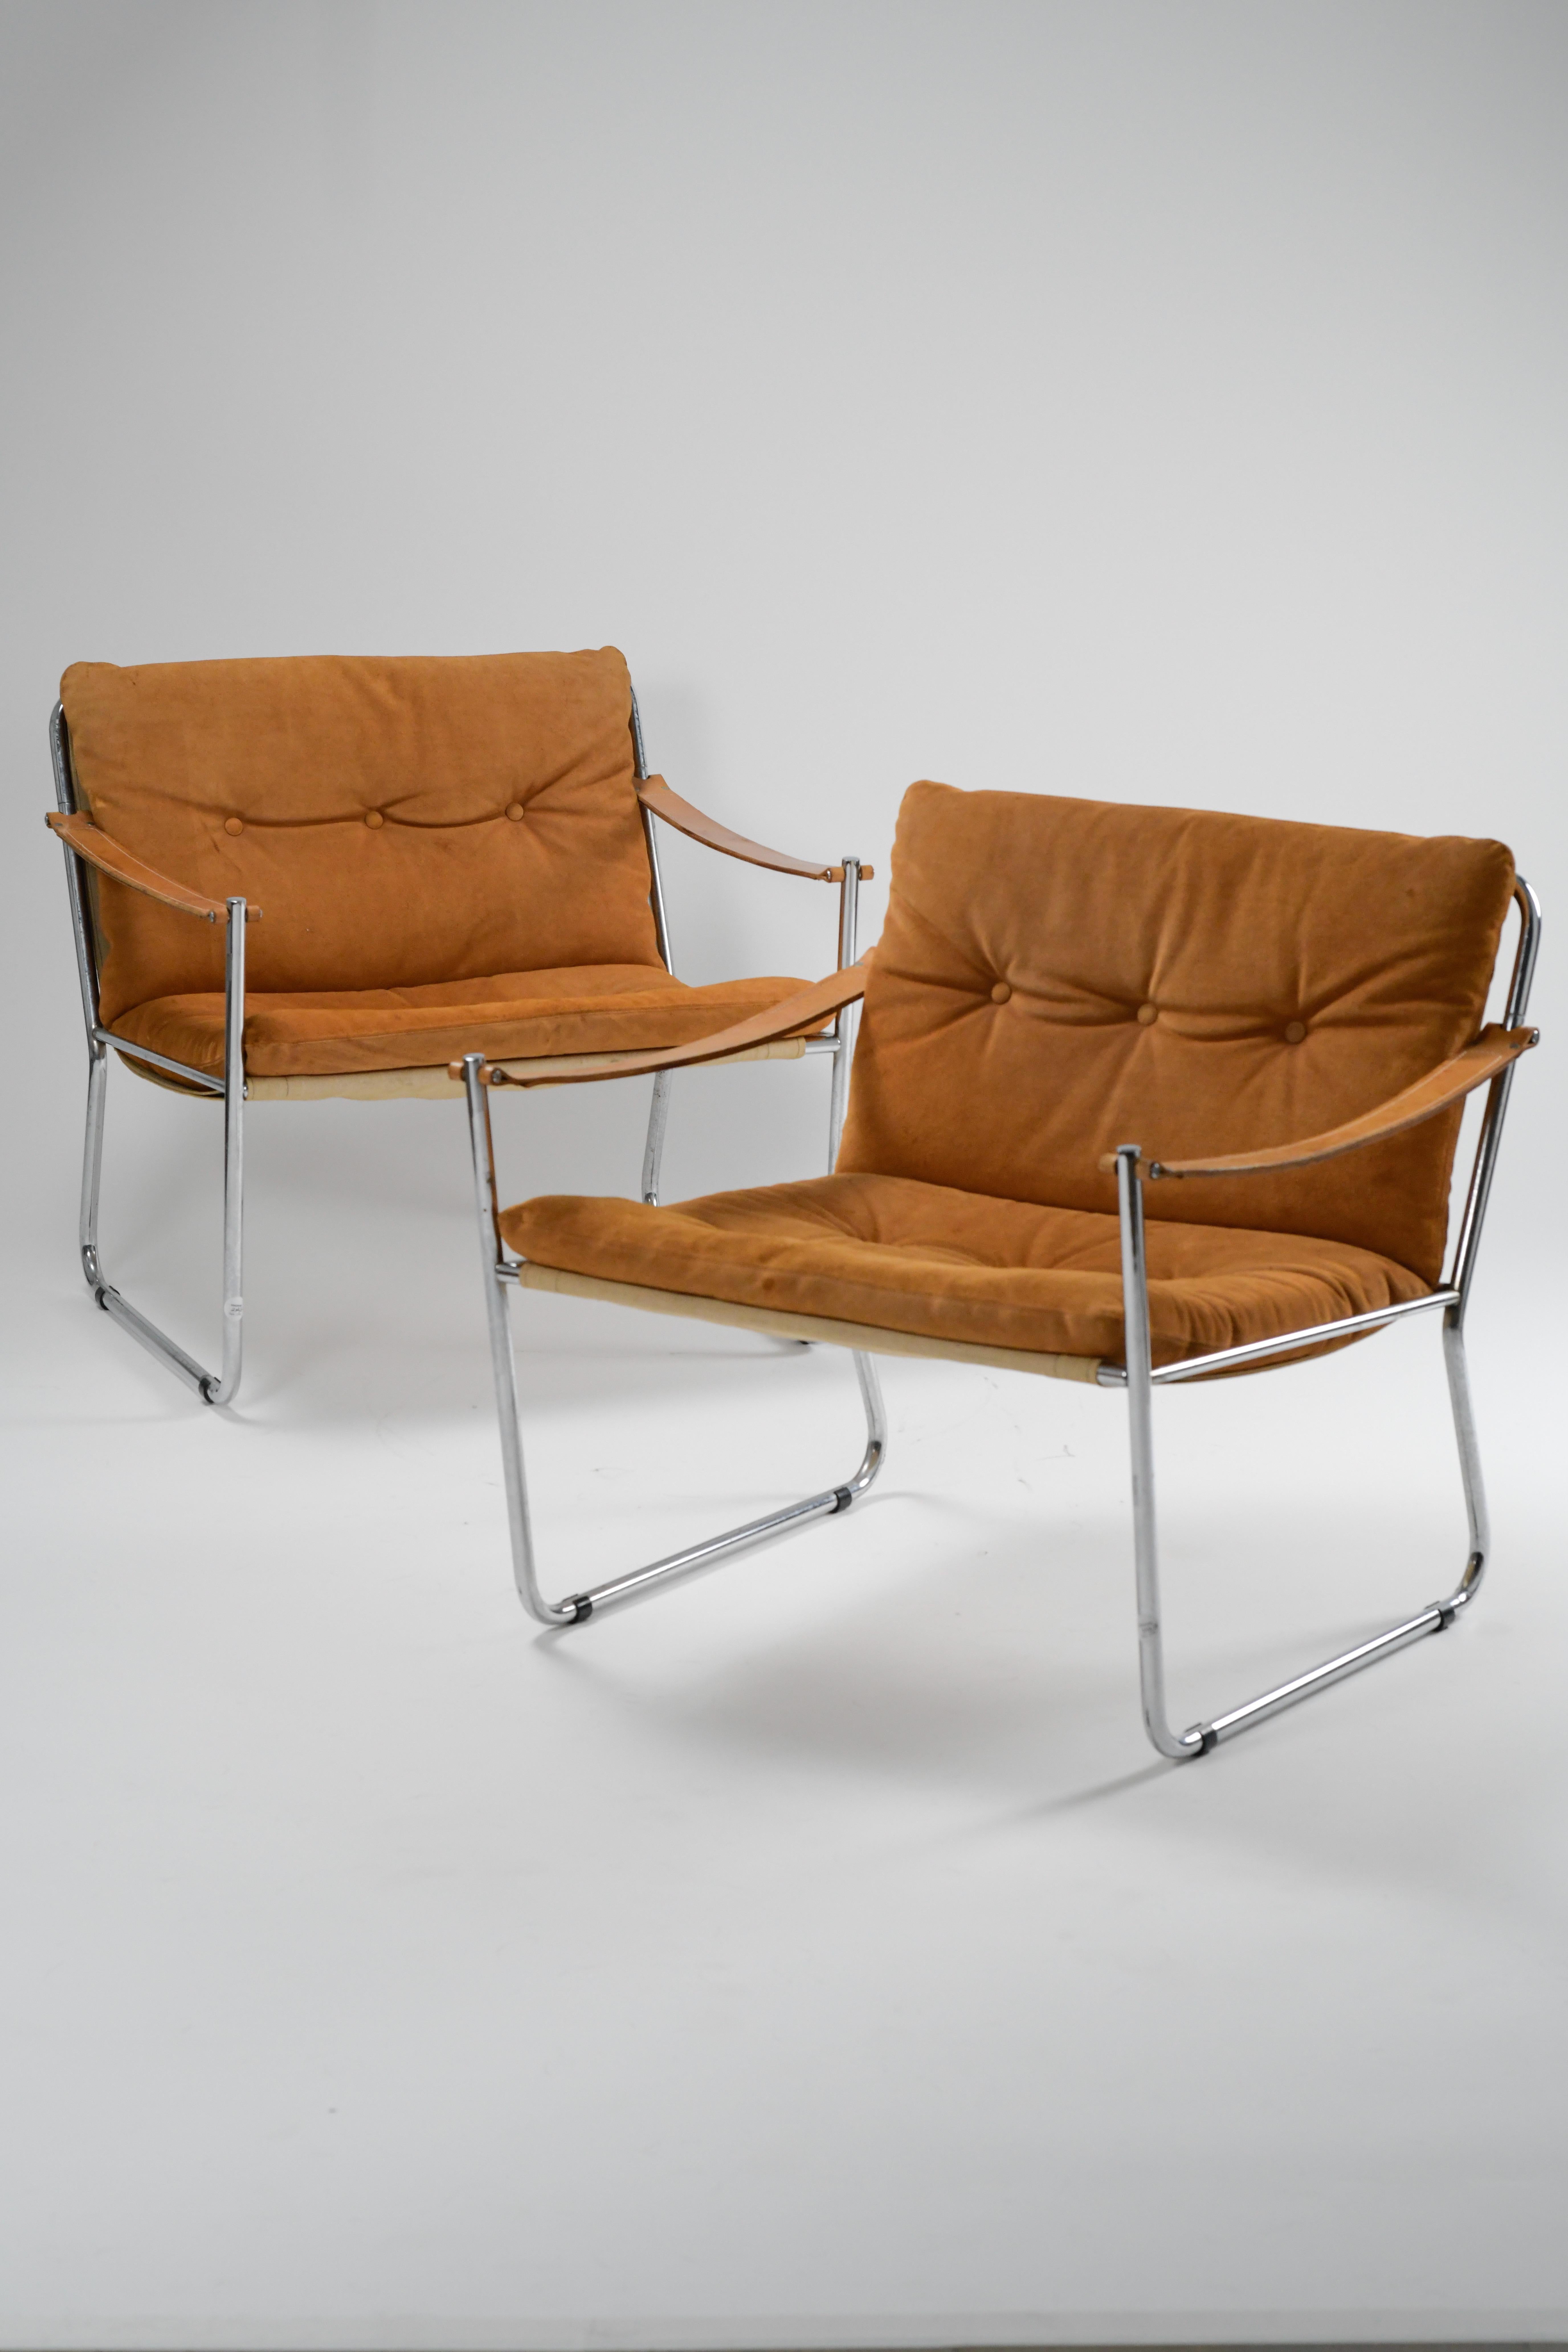 Beautiful pair of vintage 1970s lounge chairs. We are unsure about the maker of these but we believe them to be 'Amiral' chairs by Karin Mobring for Ikea. 

Made from incredibly light yet sturdy tubular steel frames, canvas supports, padded suede